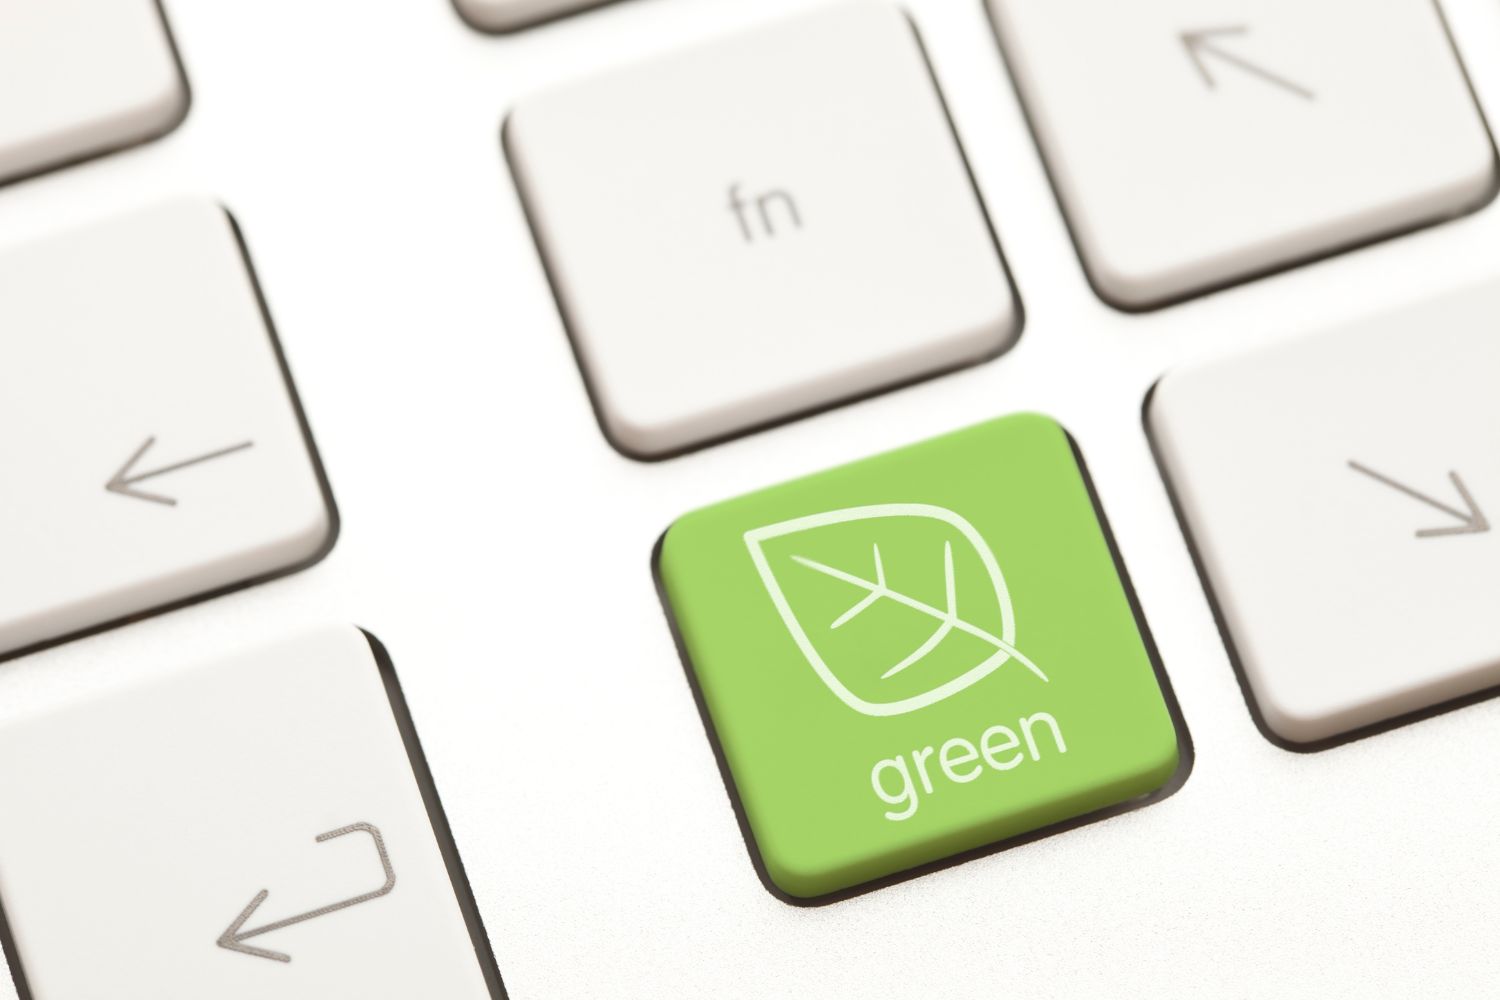 An image showing a green flag as a representation of a greener way to shop online